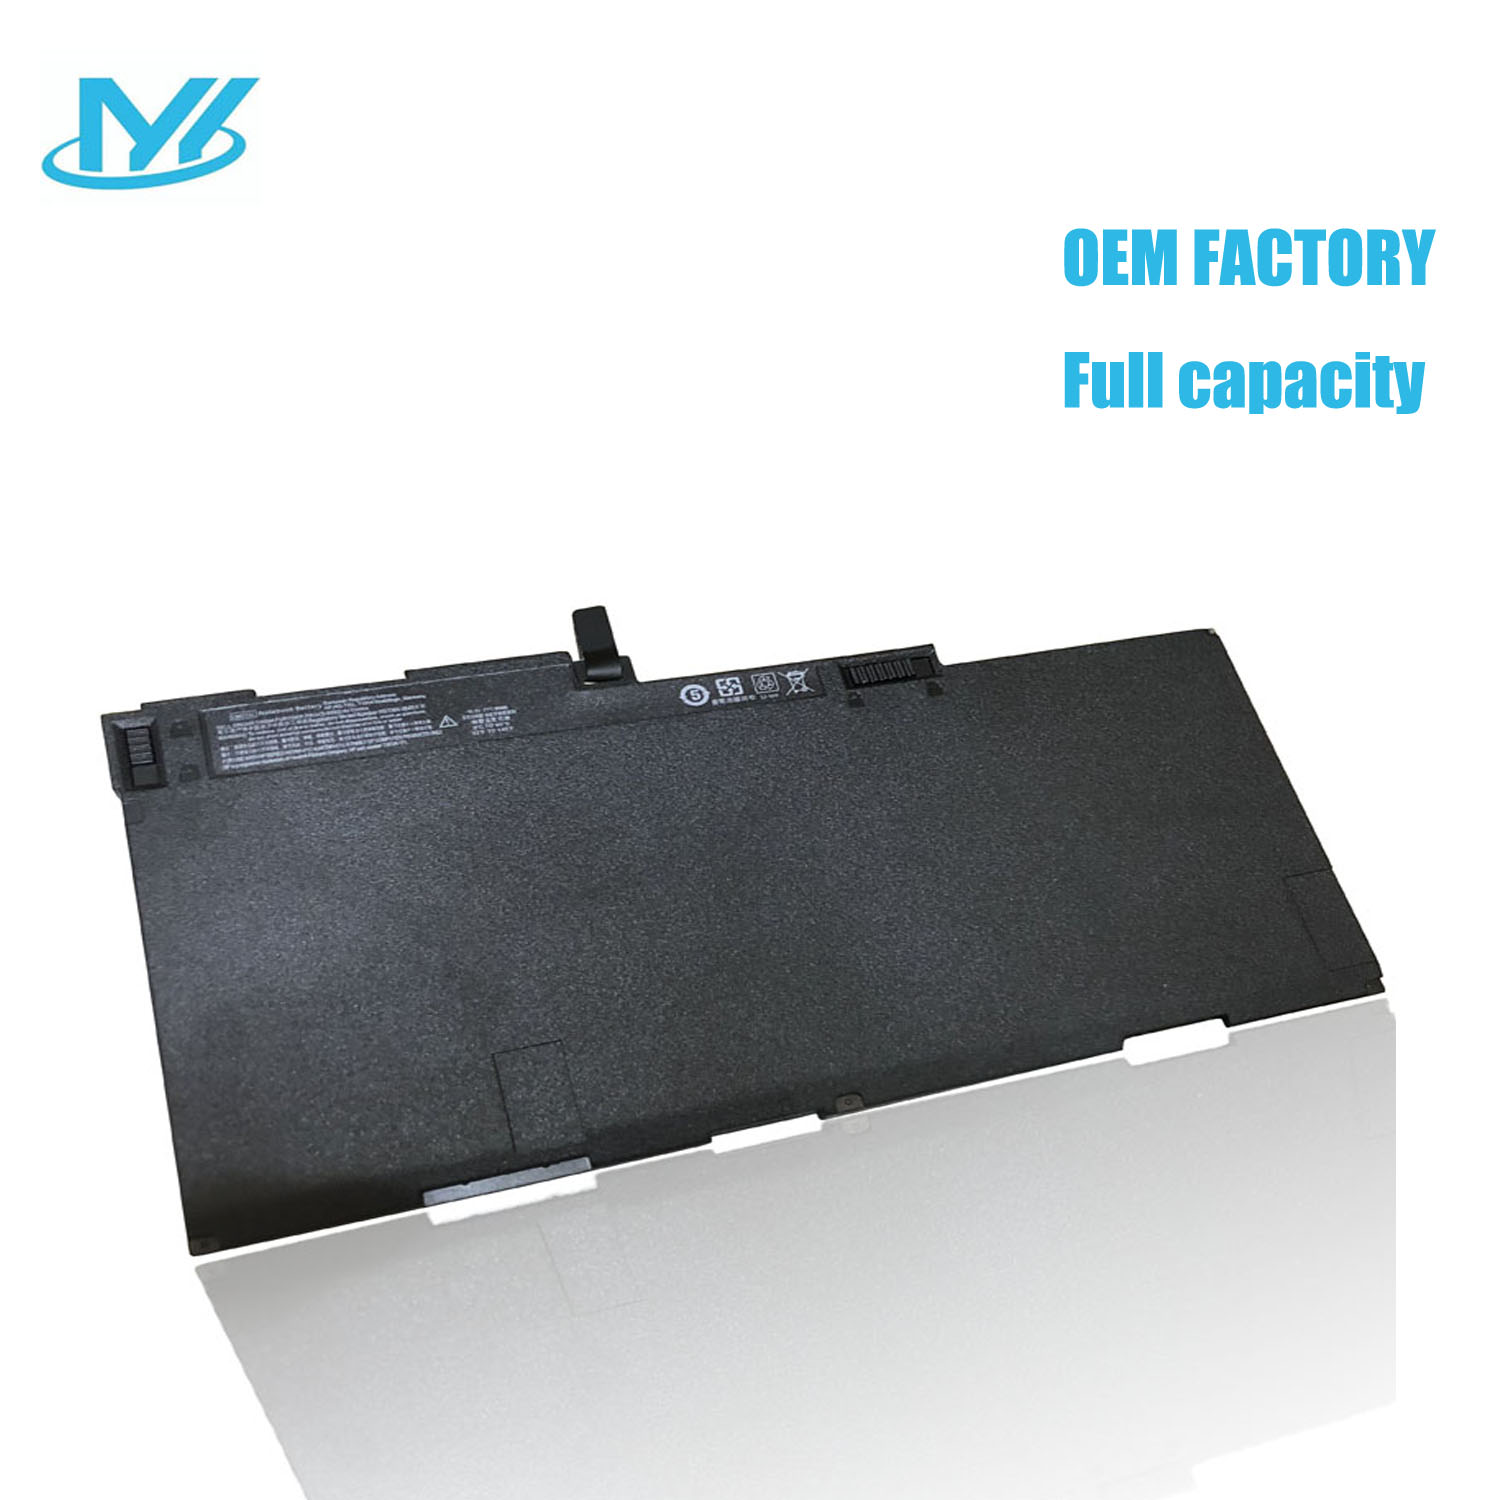 CM03XL rechargeable lithium ion Notebook battery Laptop battery EliteBook 840 845 850 740 745 750 G1 G2 11.4V 50Wh